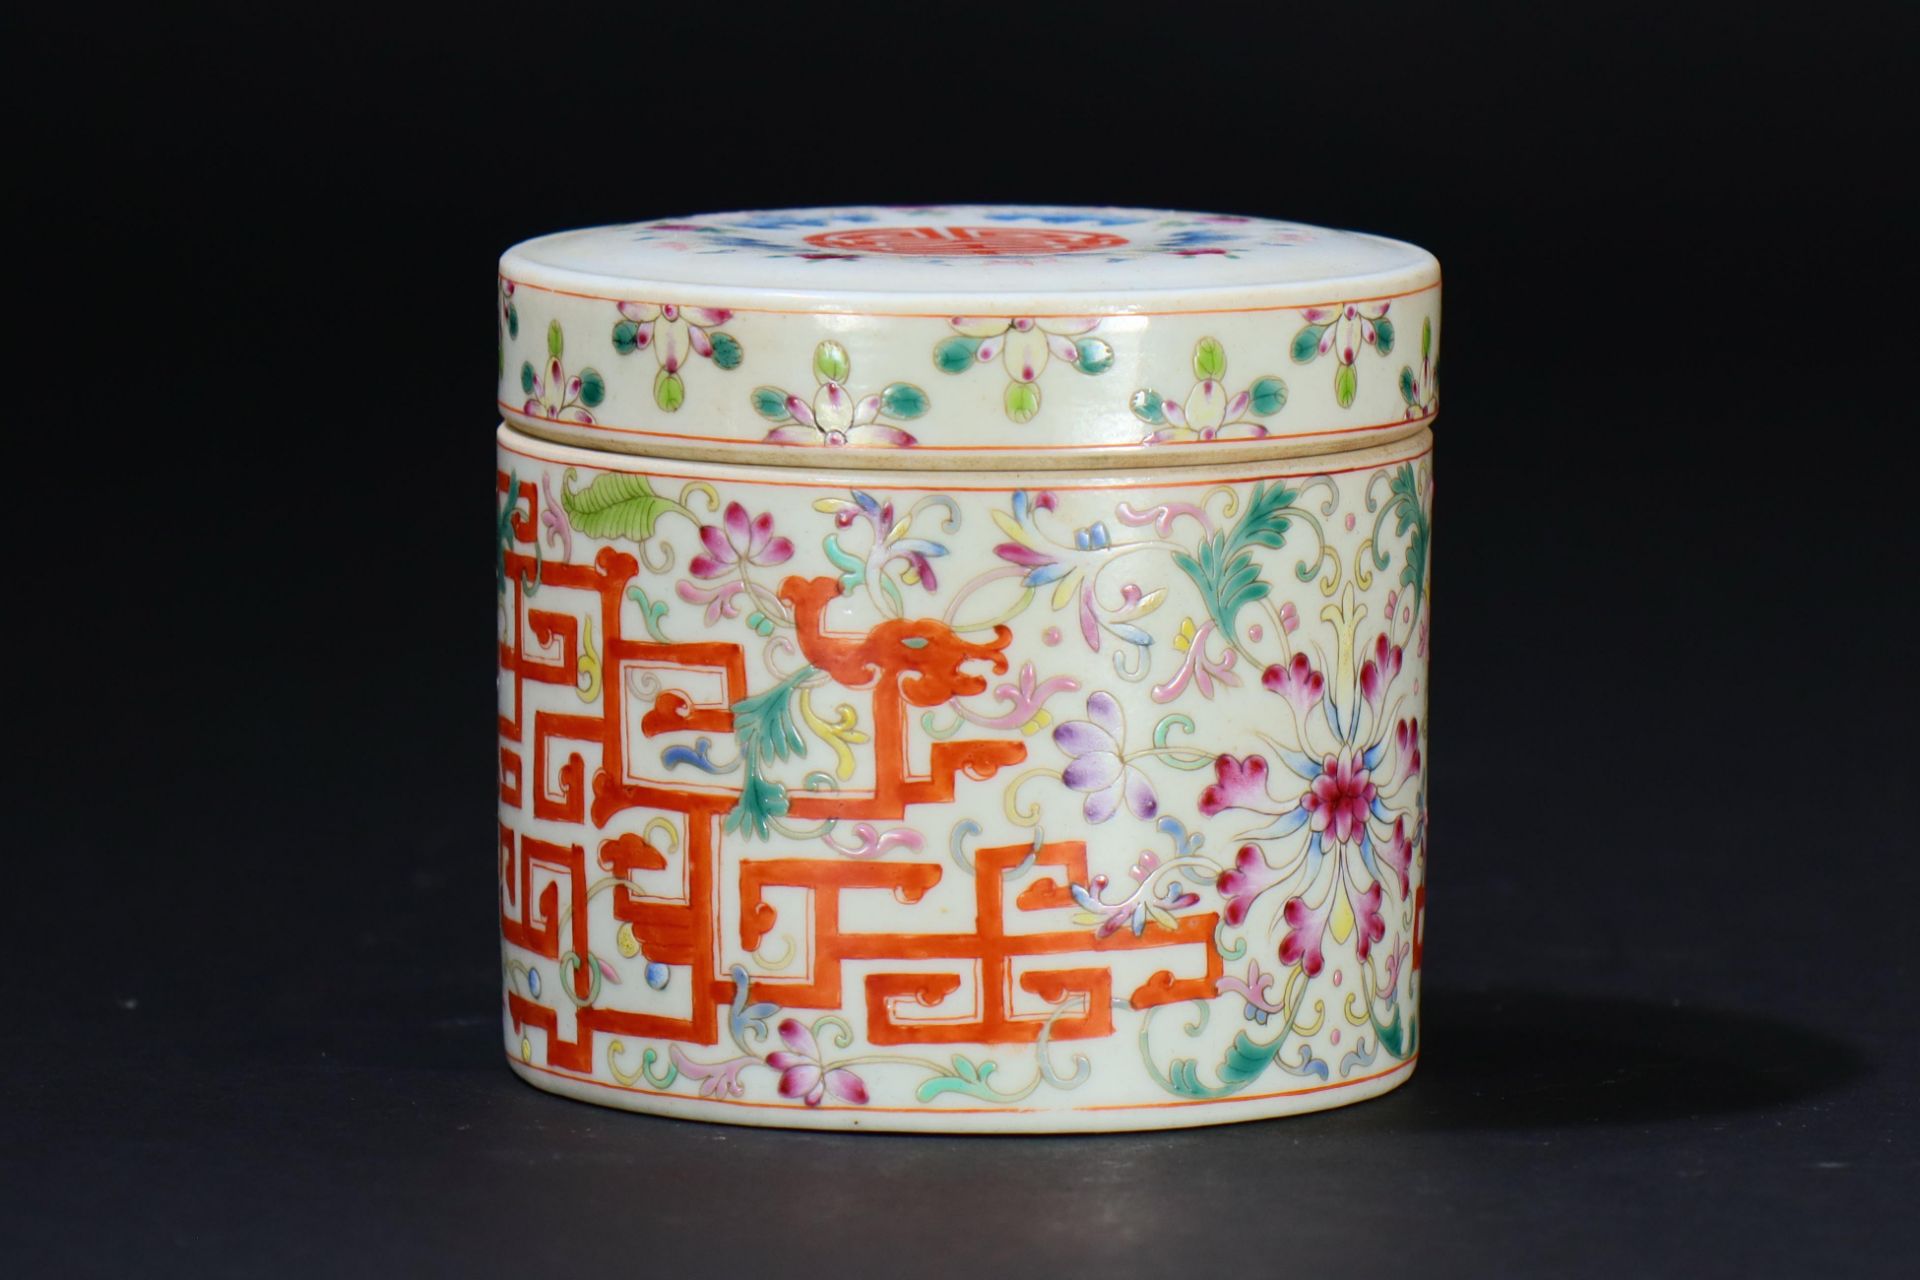 A famille rose porcelain lidded box decorated with deformed dragons and flowers, probably from